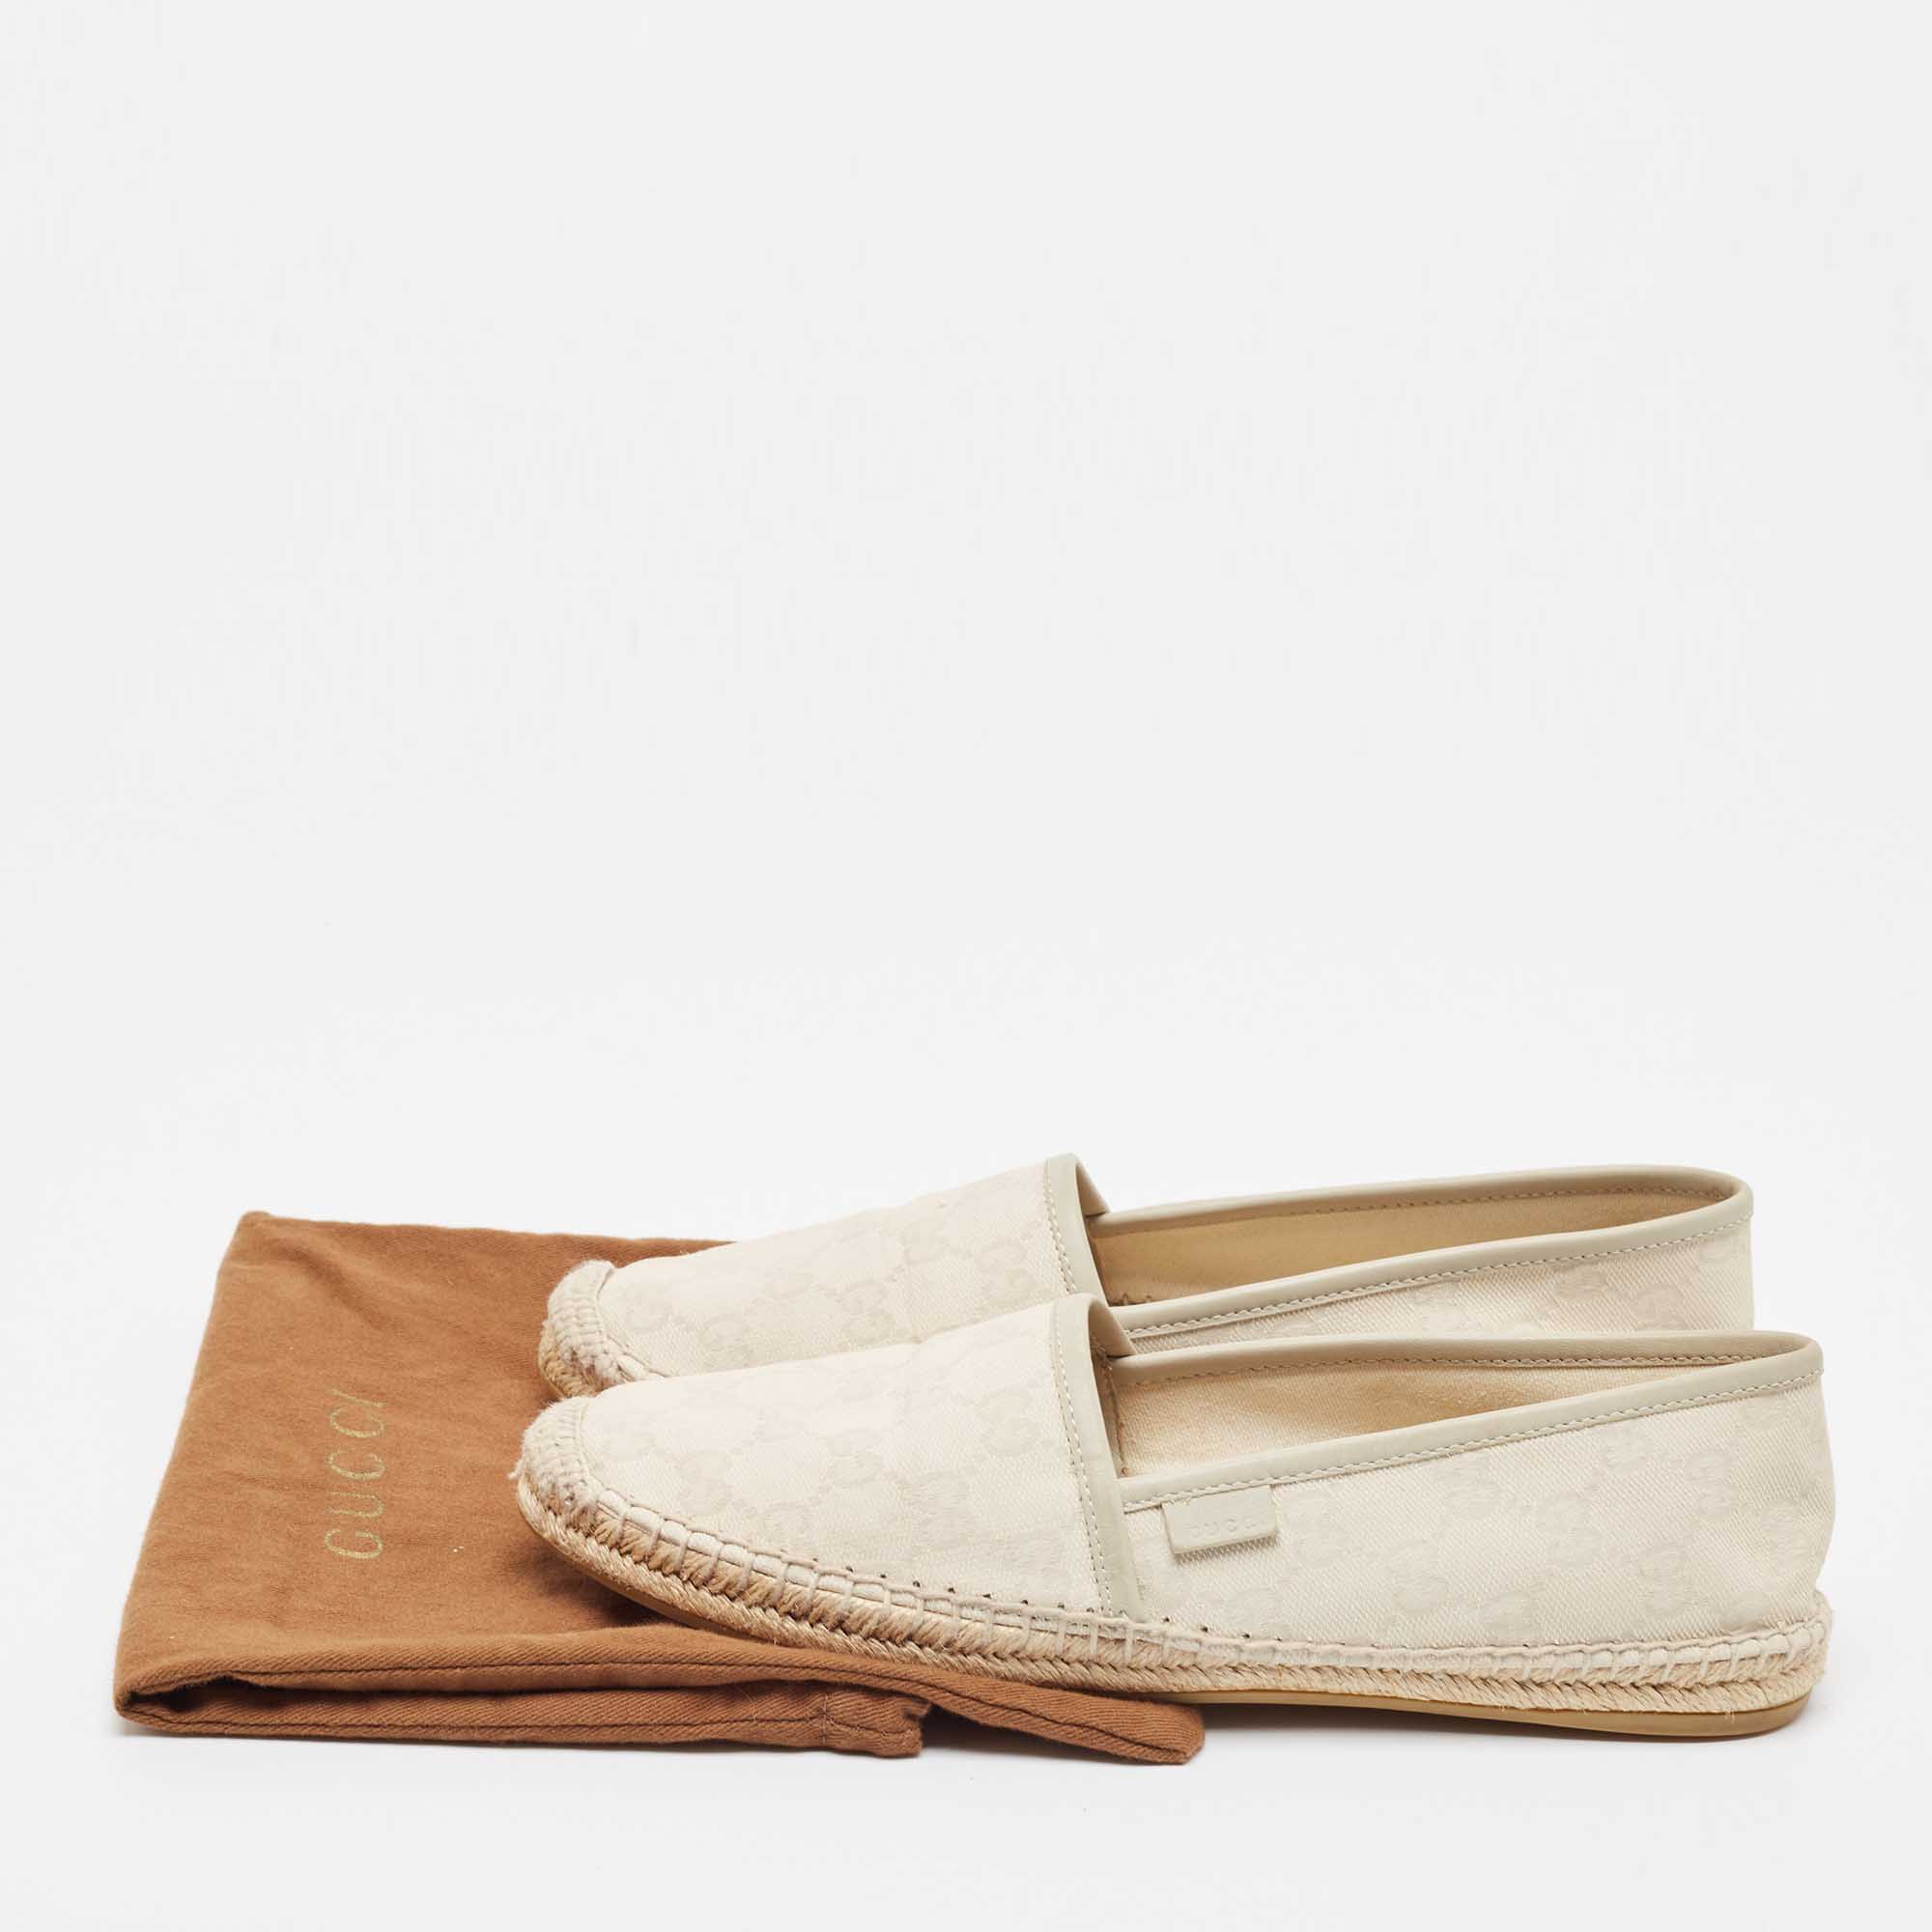 Gucci Cream/Grey GG Canvas And Leather Espadrilles Flats Size 38.5